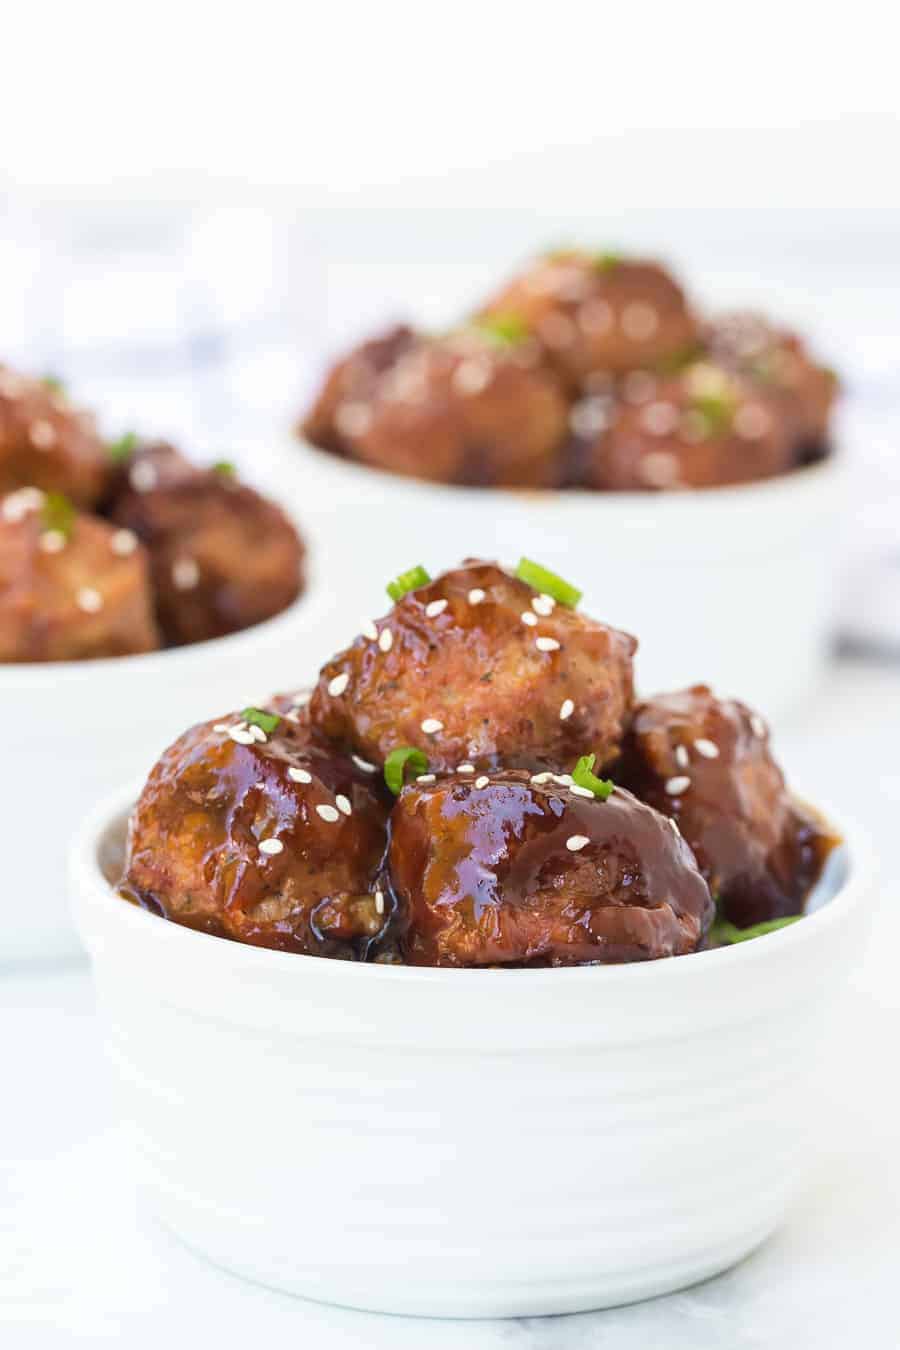 Homemade slow cooker teriyaki honey meatballs are a sweet, savory, and satisfying appetizer that comes together so easily for a scrumptious snack everyone will love. #meatballs #teriyaki #slowcookermeatballs